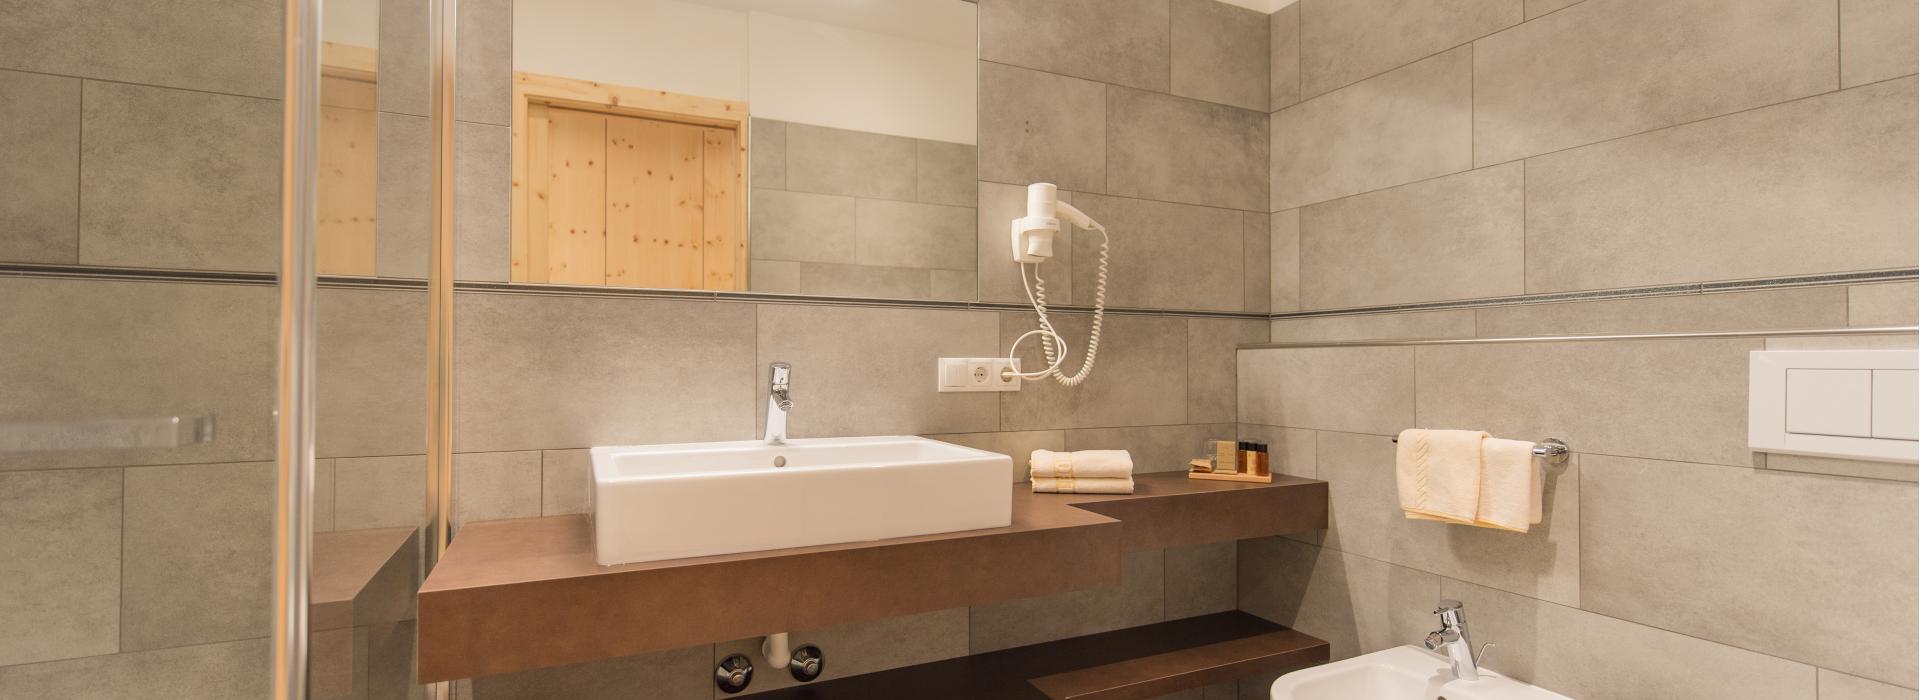 Bathroom of the double room Sepp Innerkofler South with shower, washbasin, bidet and toilet